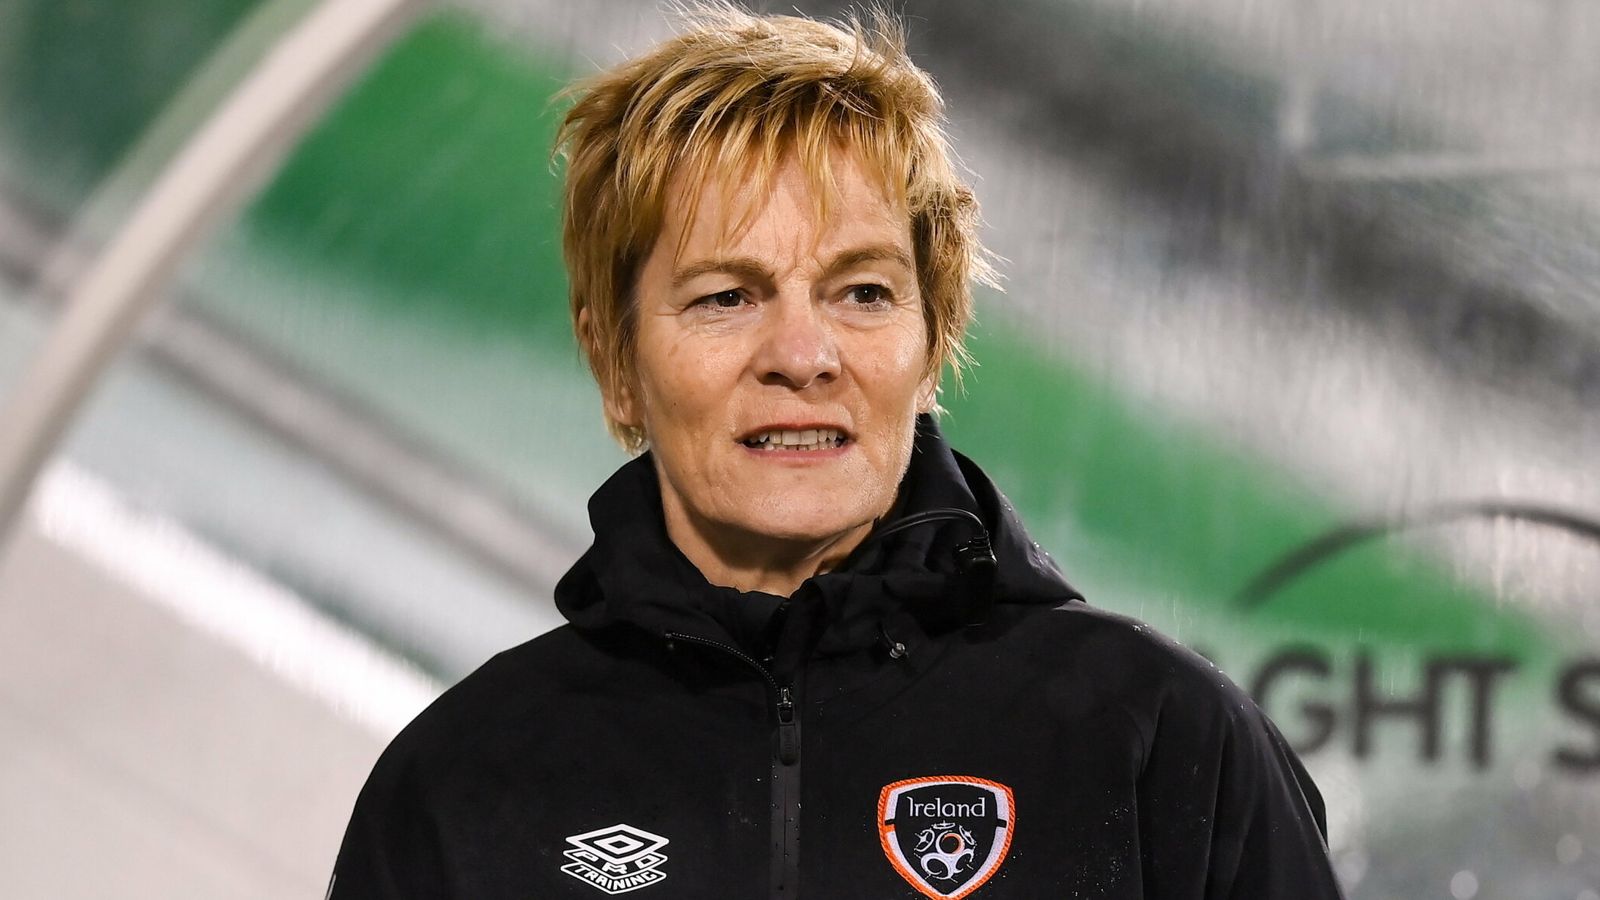 Football Association of Ireland supports Vera Pauw over allegations of rape and abuse when she was a player